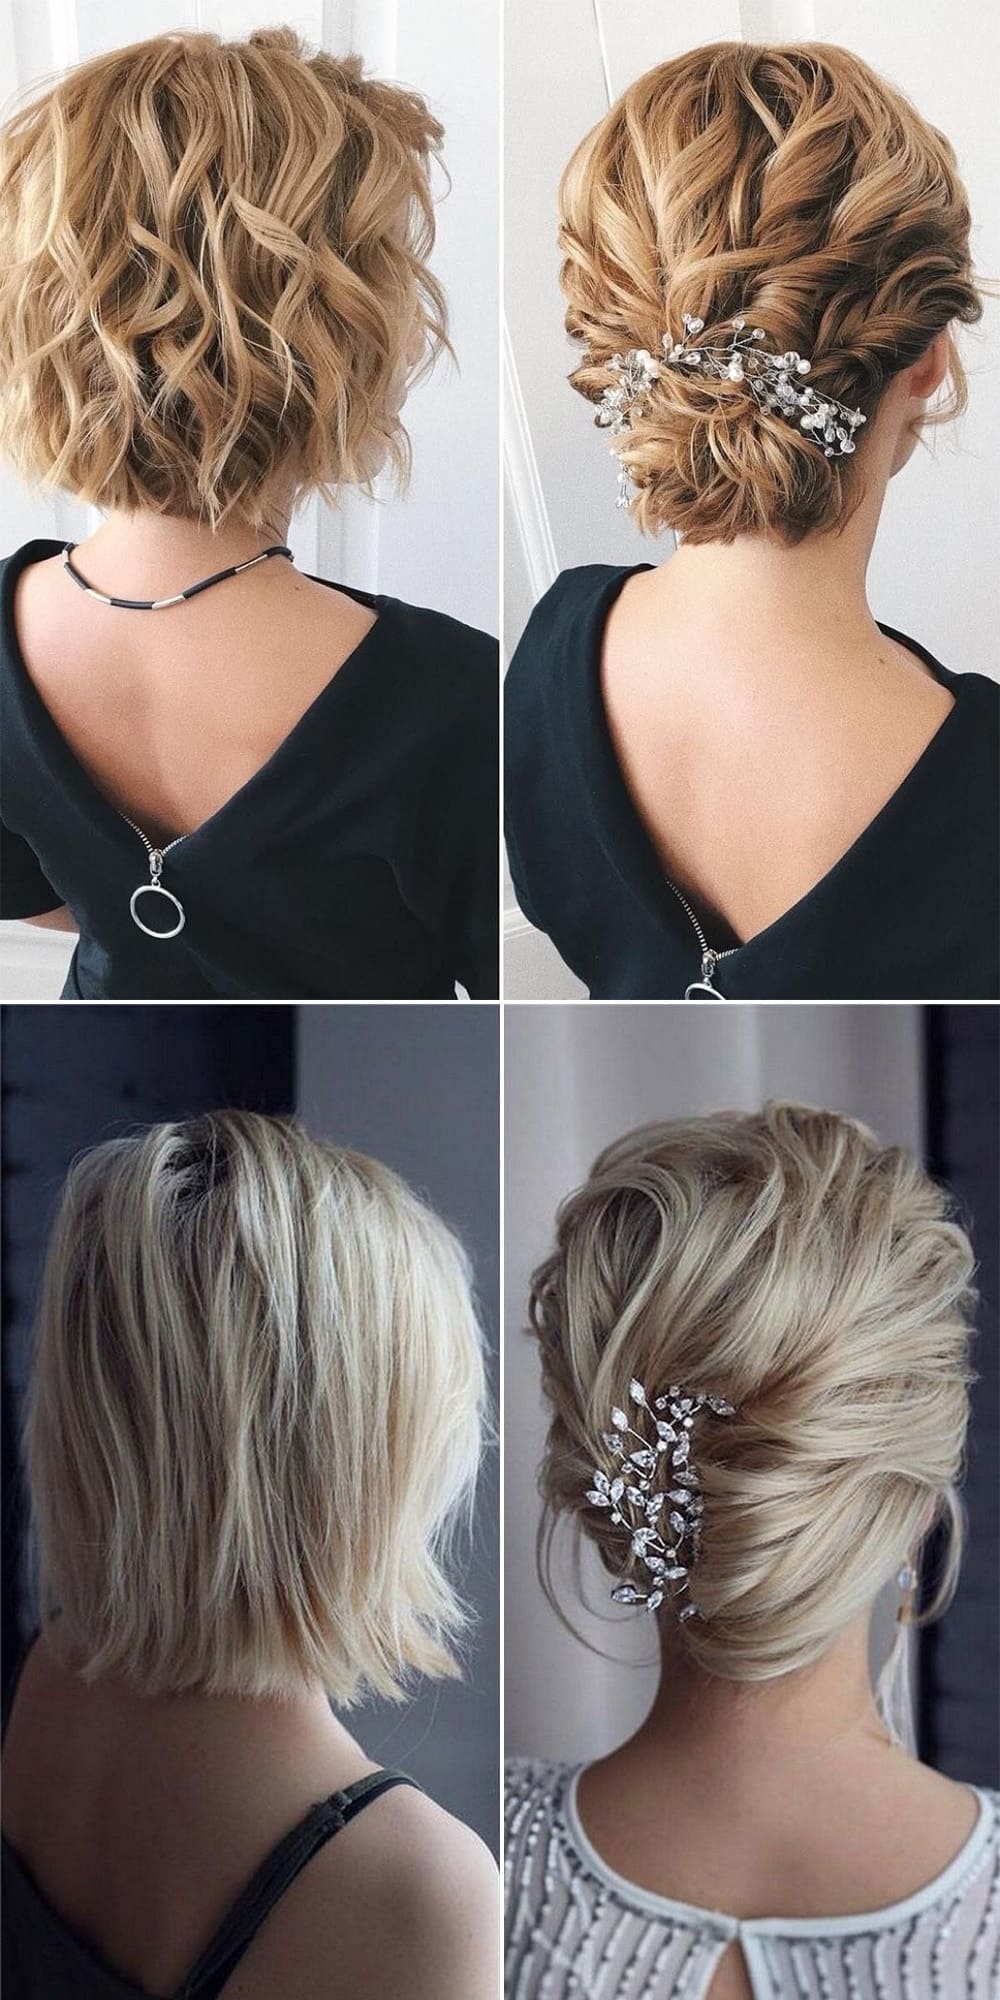 30 Gorgeous Natural Wedding Hairstyles for Short Hair - Merry Hook